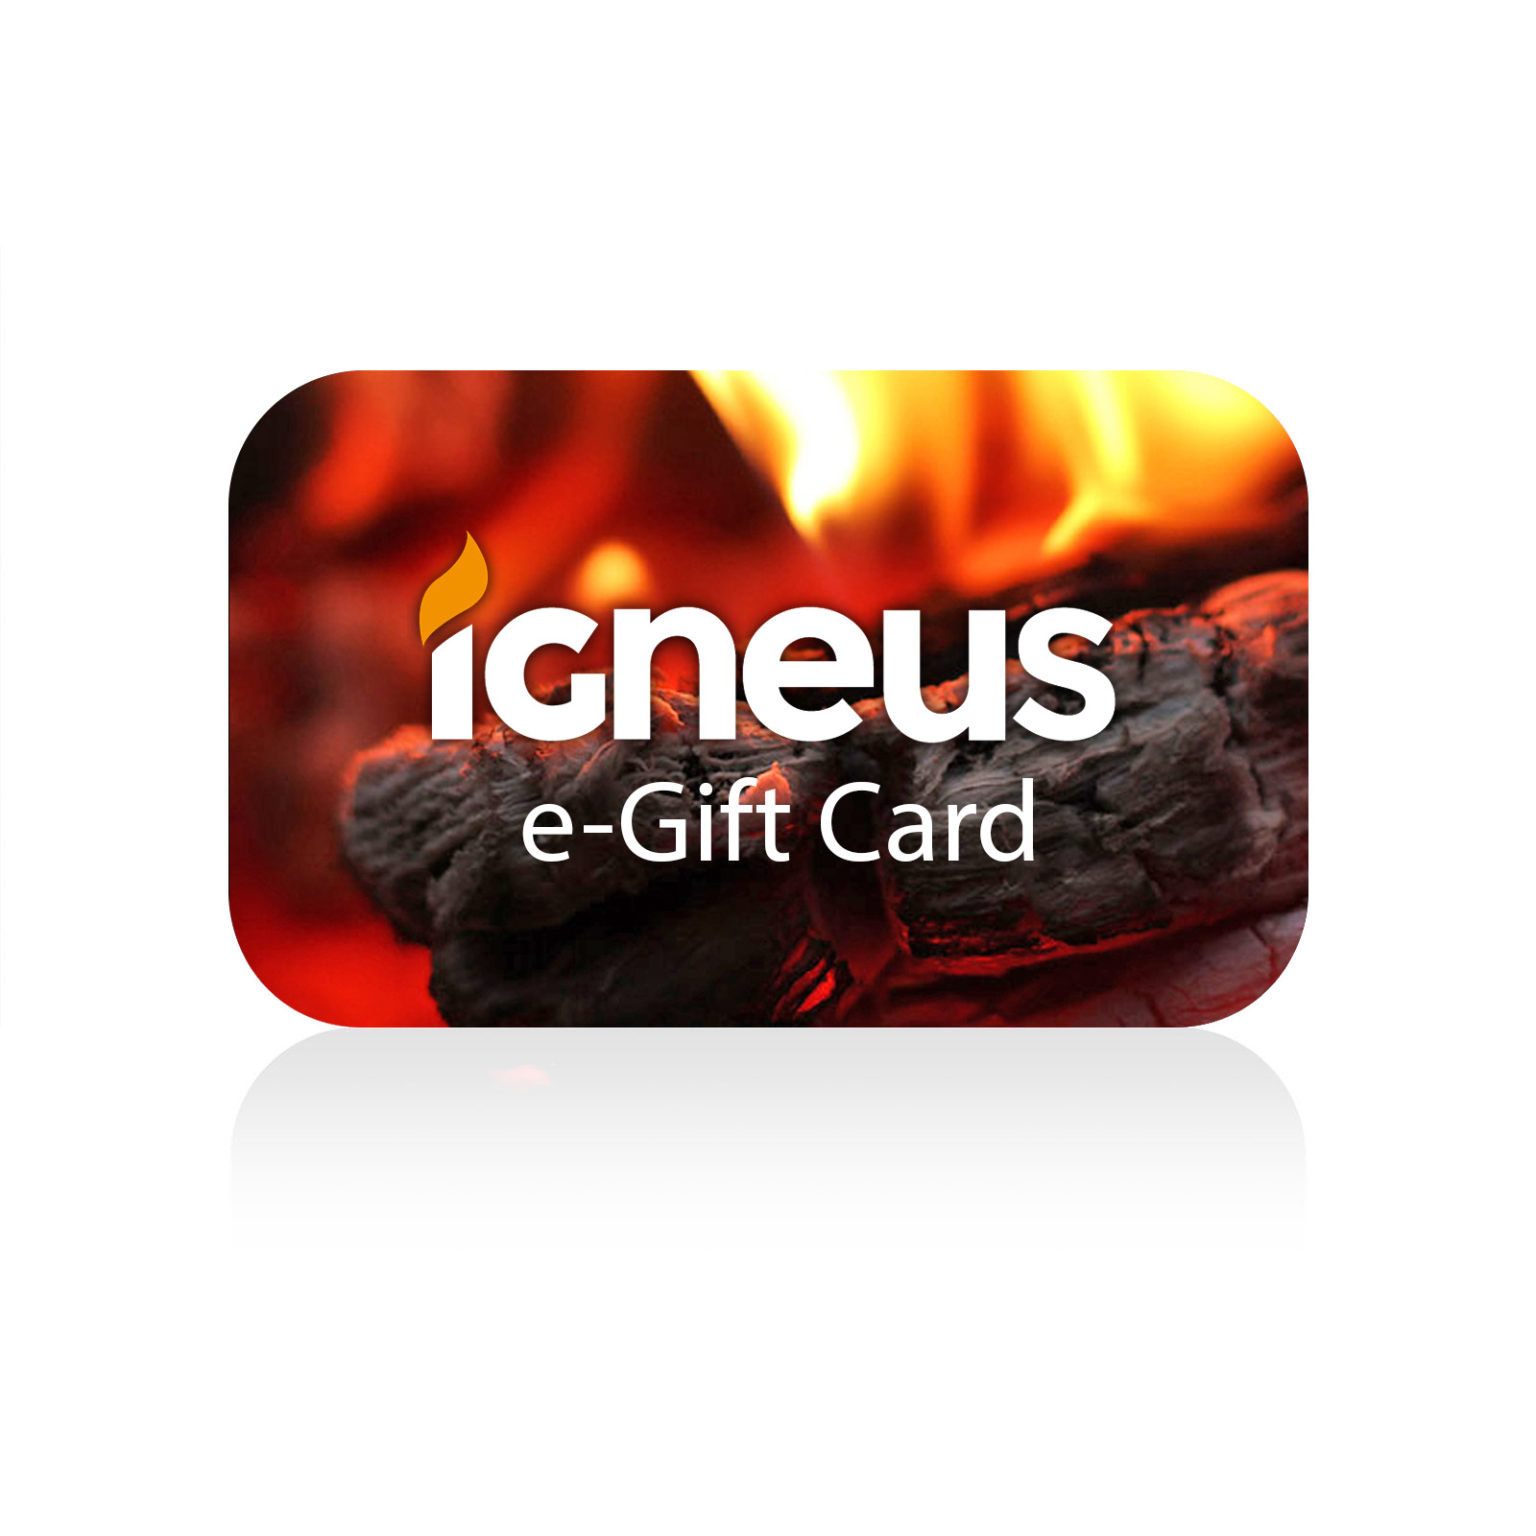 Igneus wood fired pizza ovens e-gift card